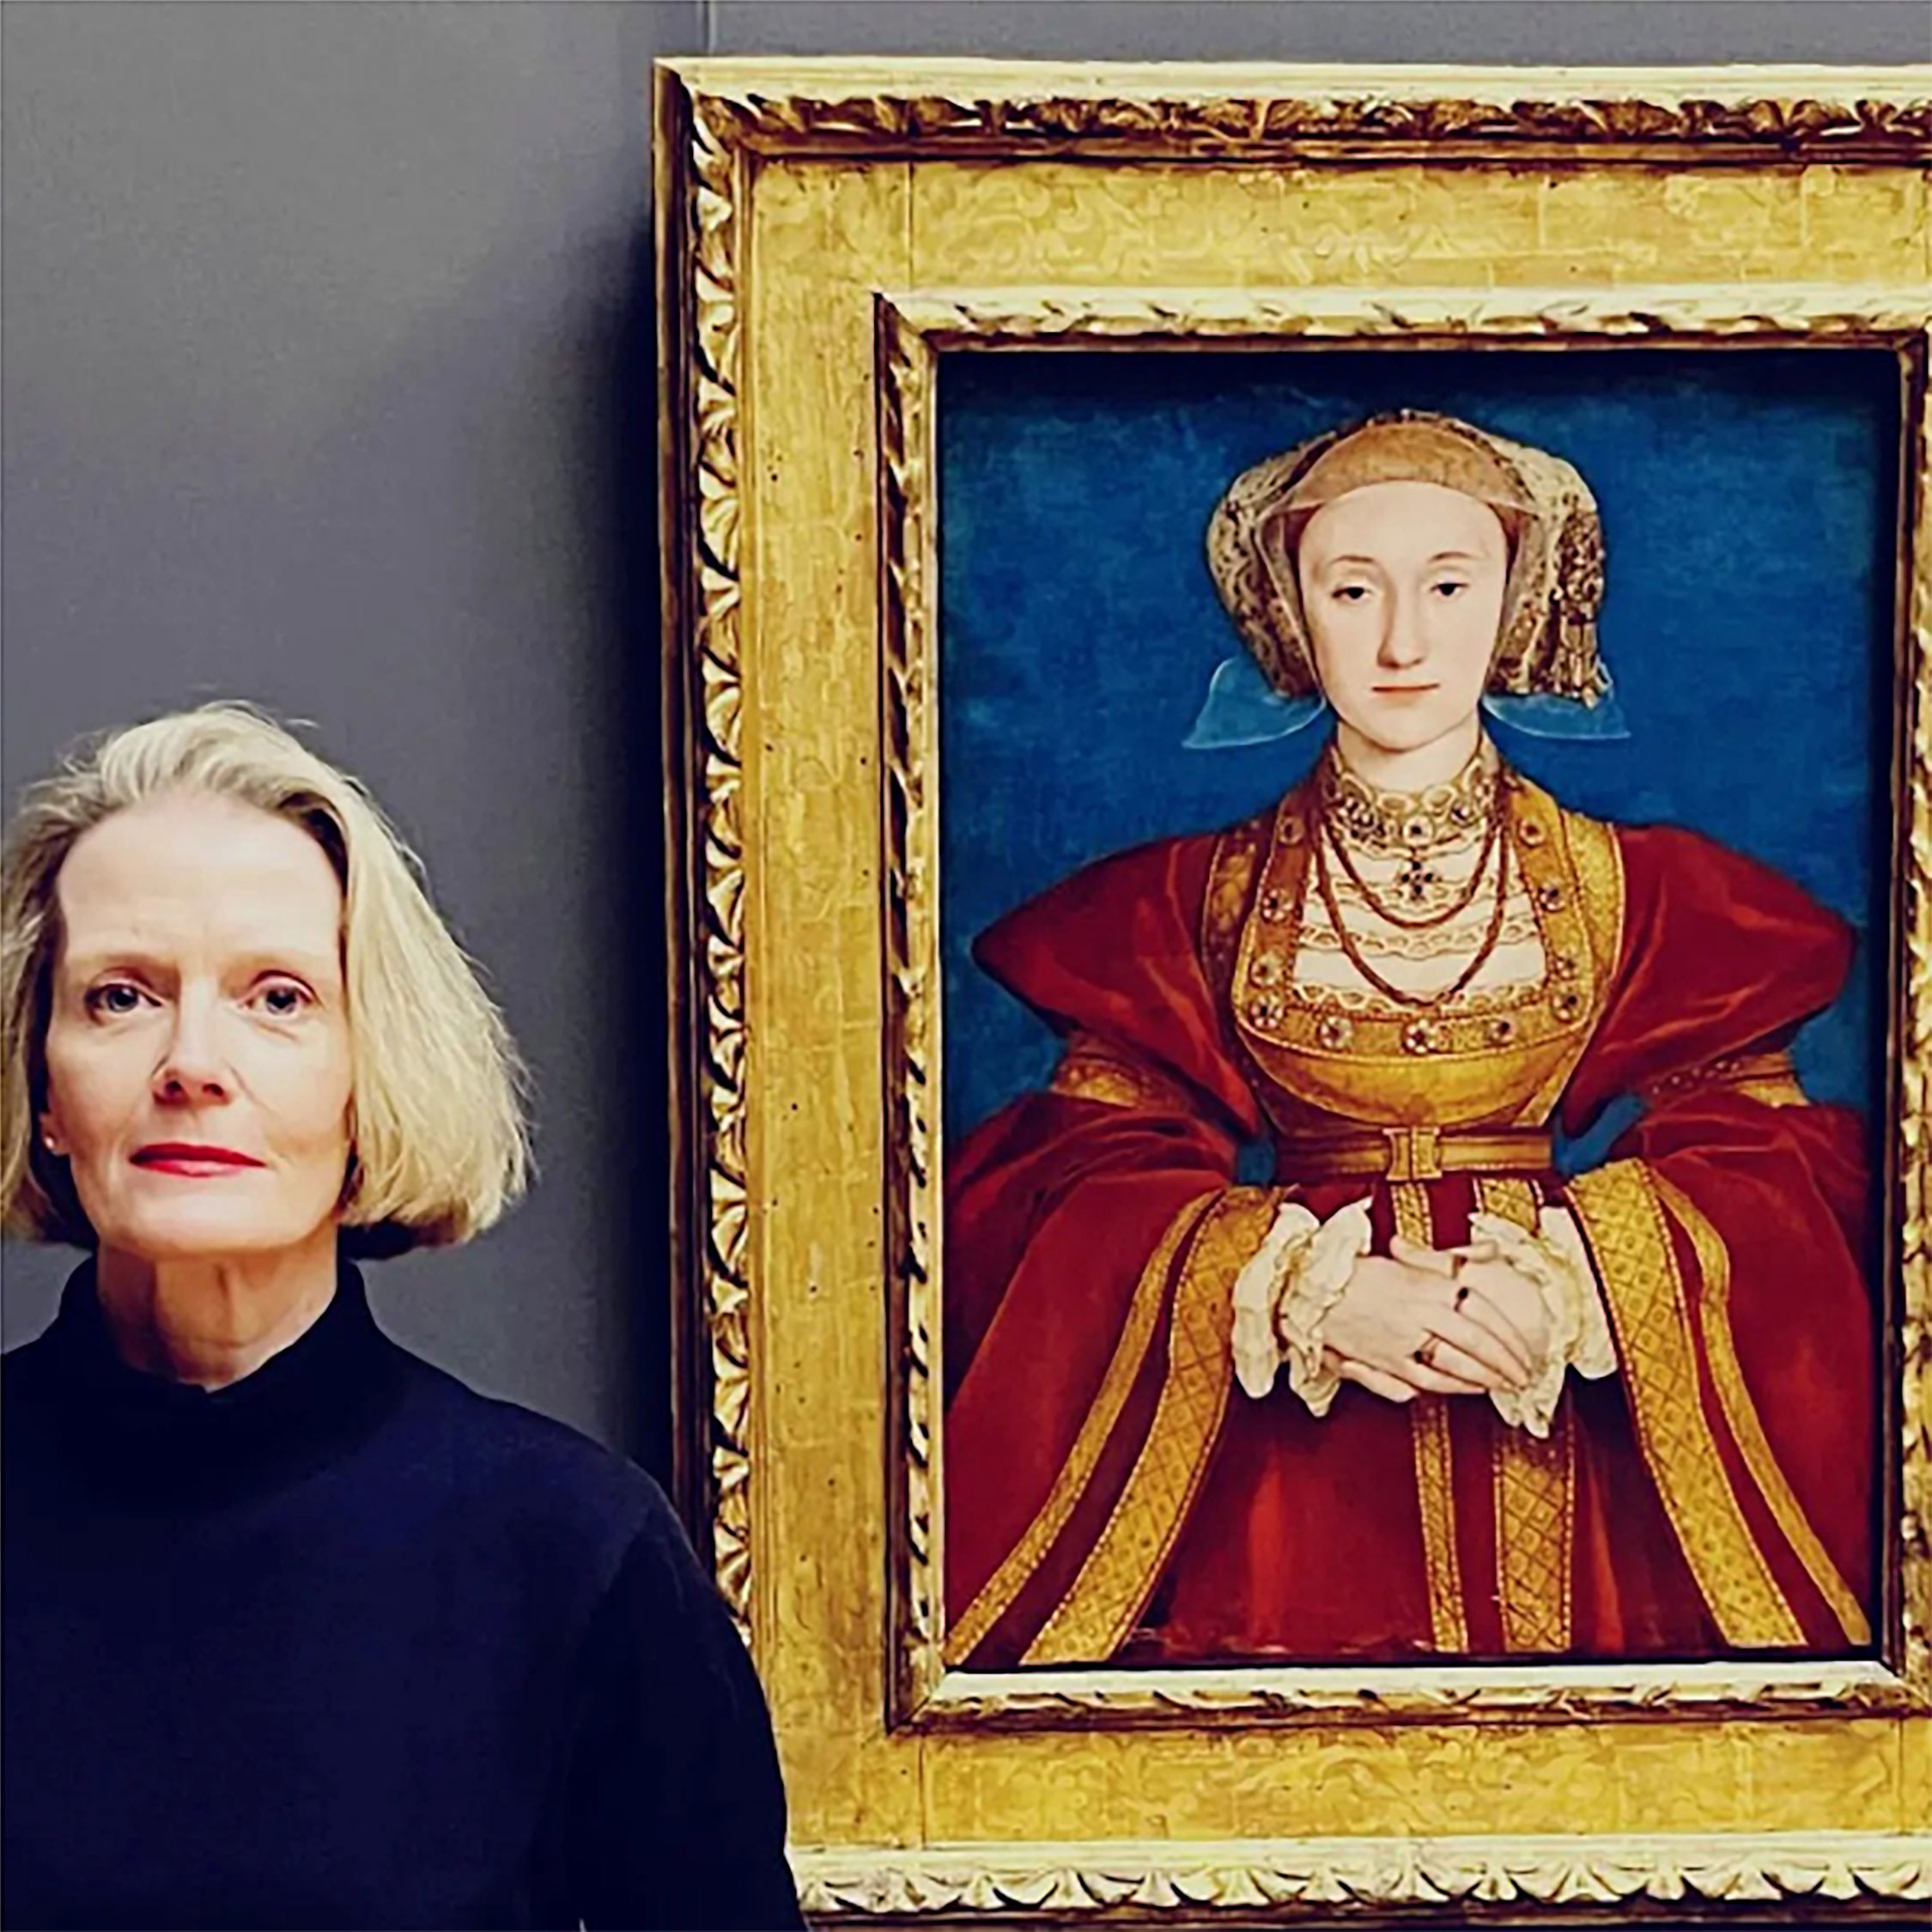 Photograph of Wendy standing beside a painting by Hans Holbein